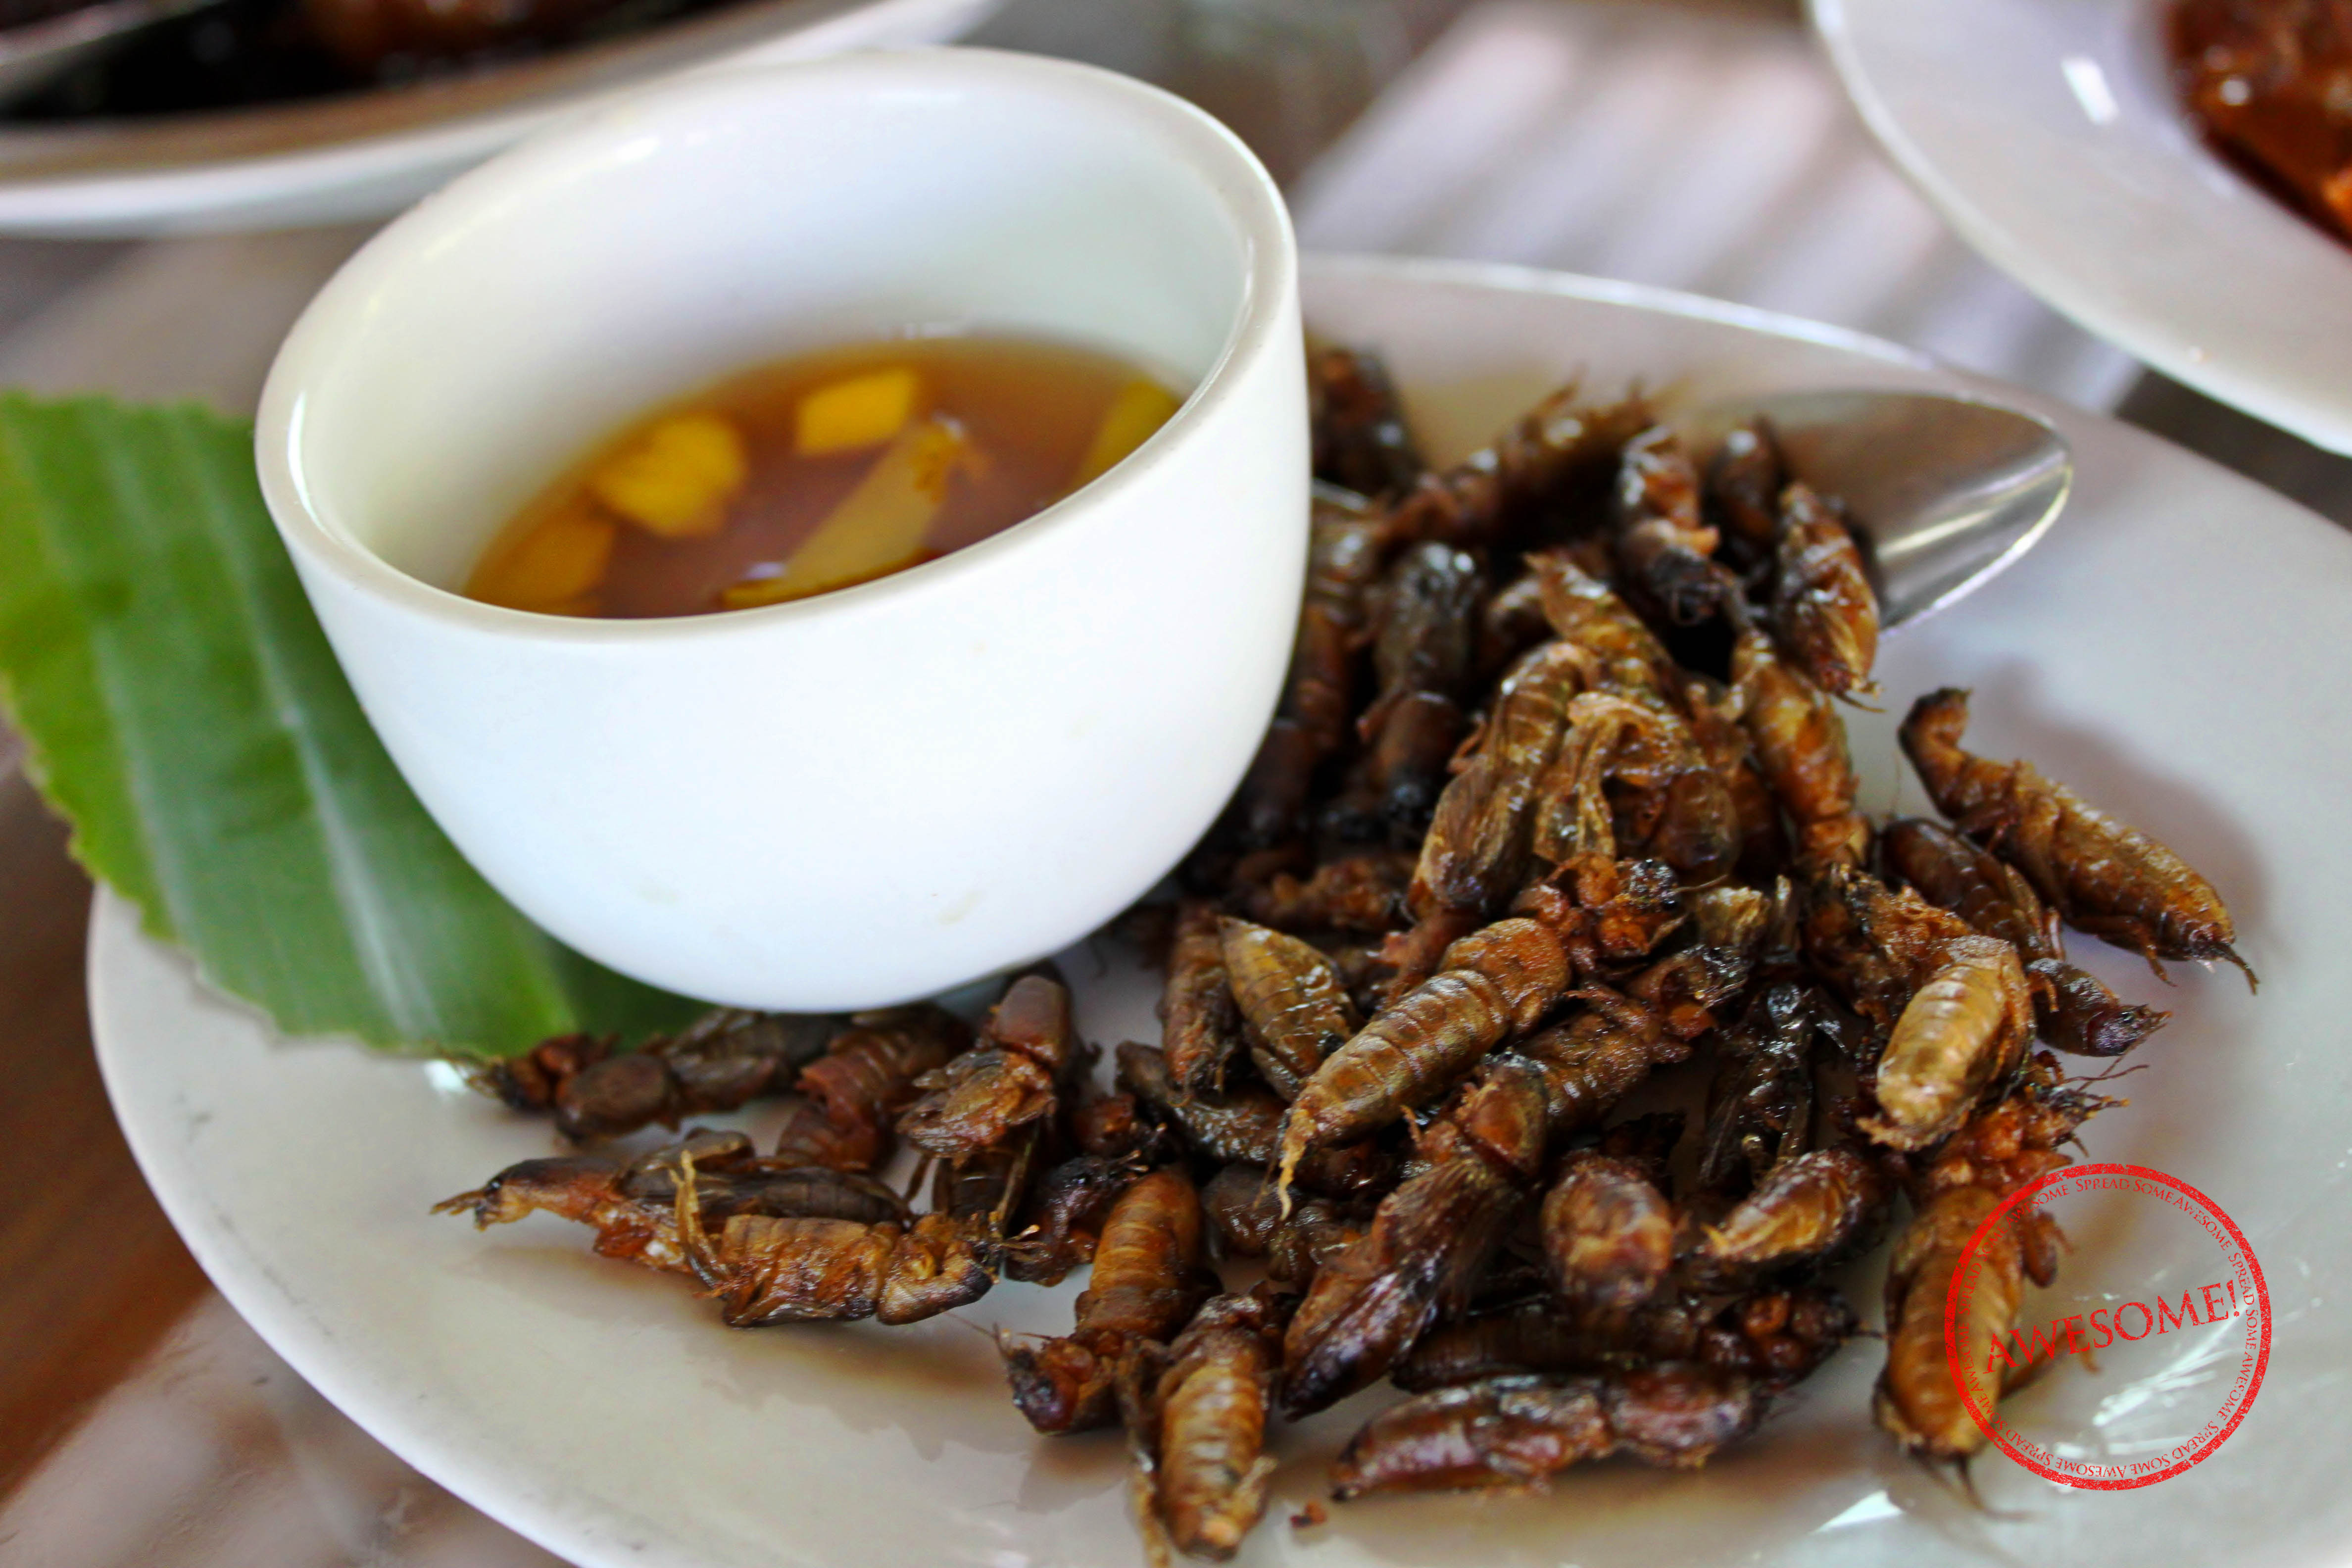 10 Filipino Dishes You've Never Heard Of That You Must Try Now (KC Canlas)